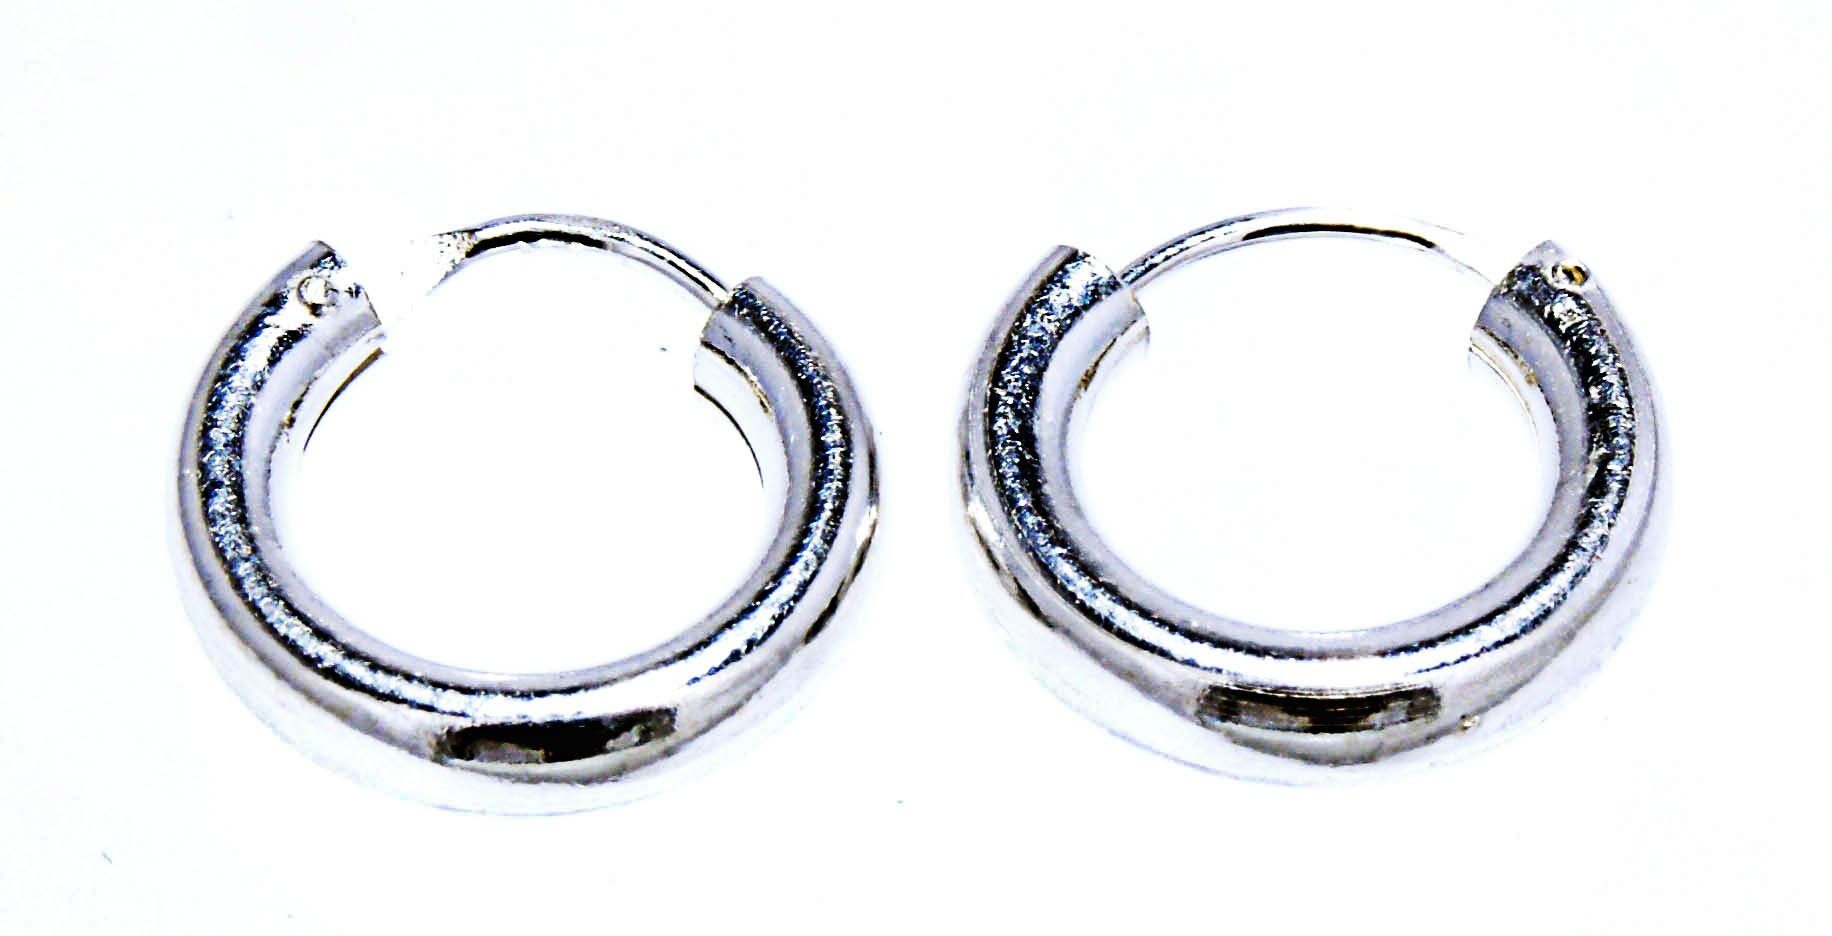 Kiss of Leather Ohrring-Set Kreole Creole Schlicht 925 Ohrringe Ohr Paarpreis Sterling Silber